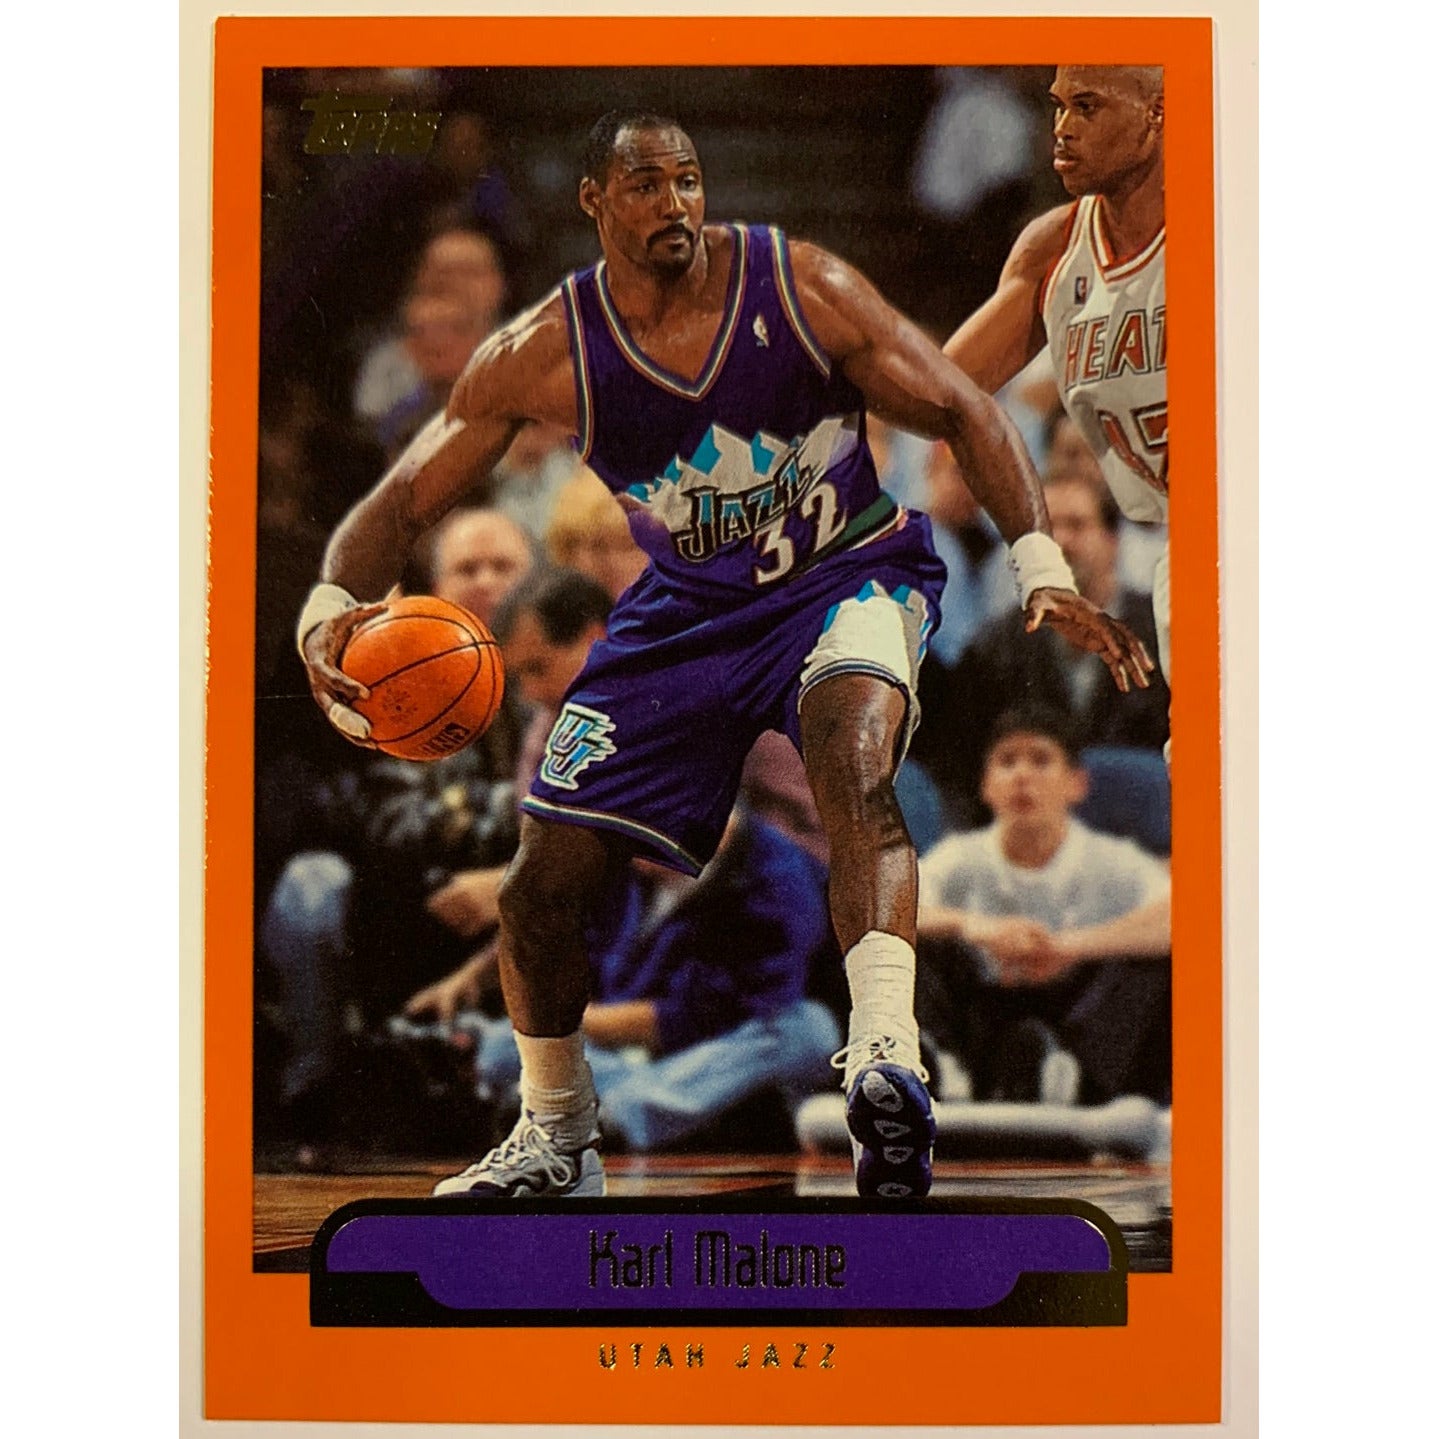  1999-00 Topps Karl Malone  Local Legends Cards & Collectibles